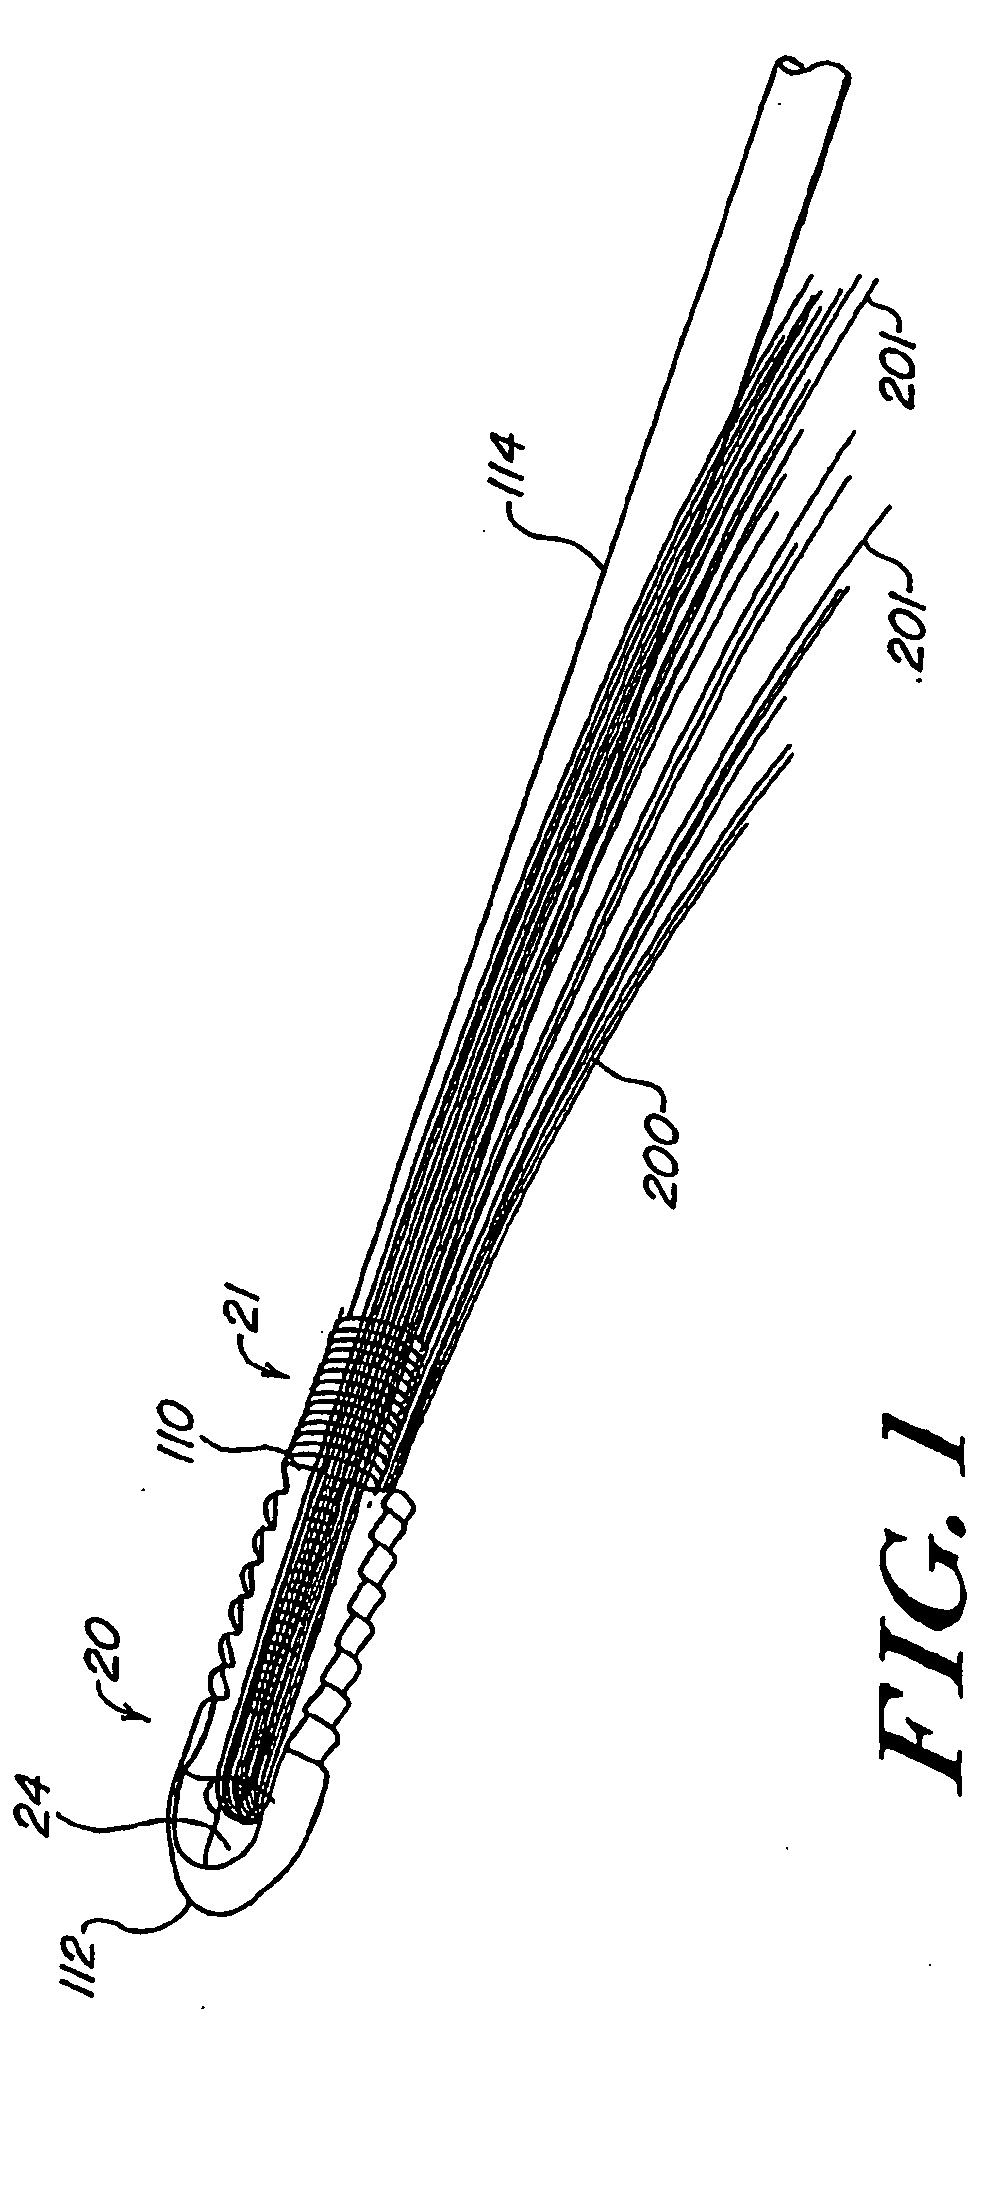 Expanding ligament graft fixation system and method